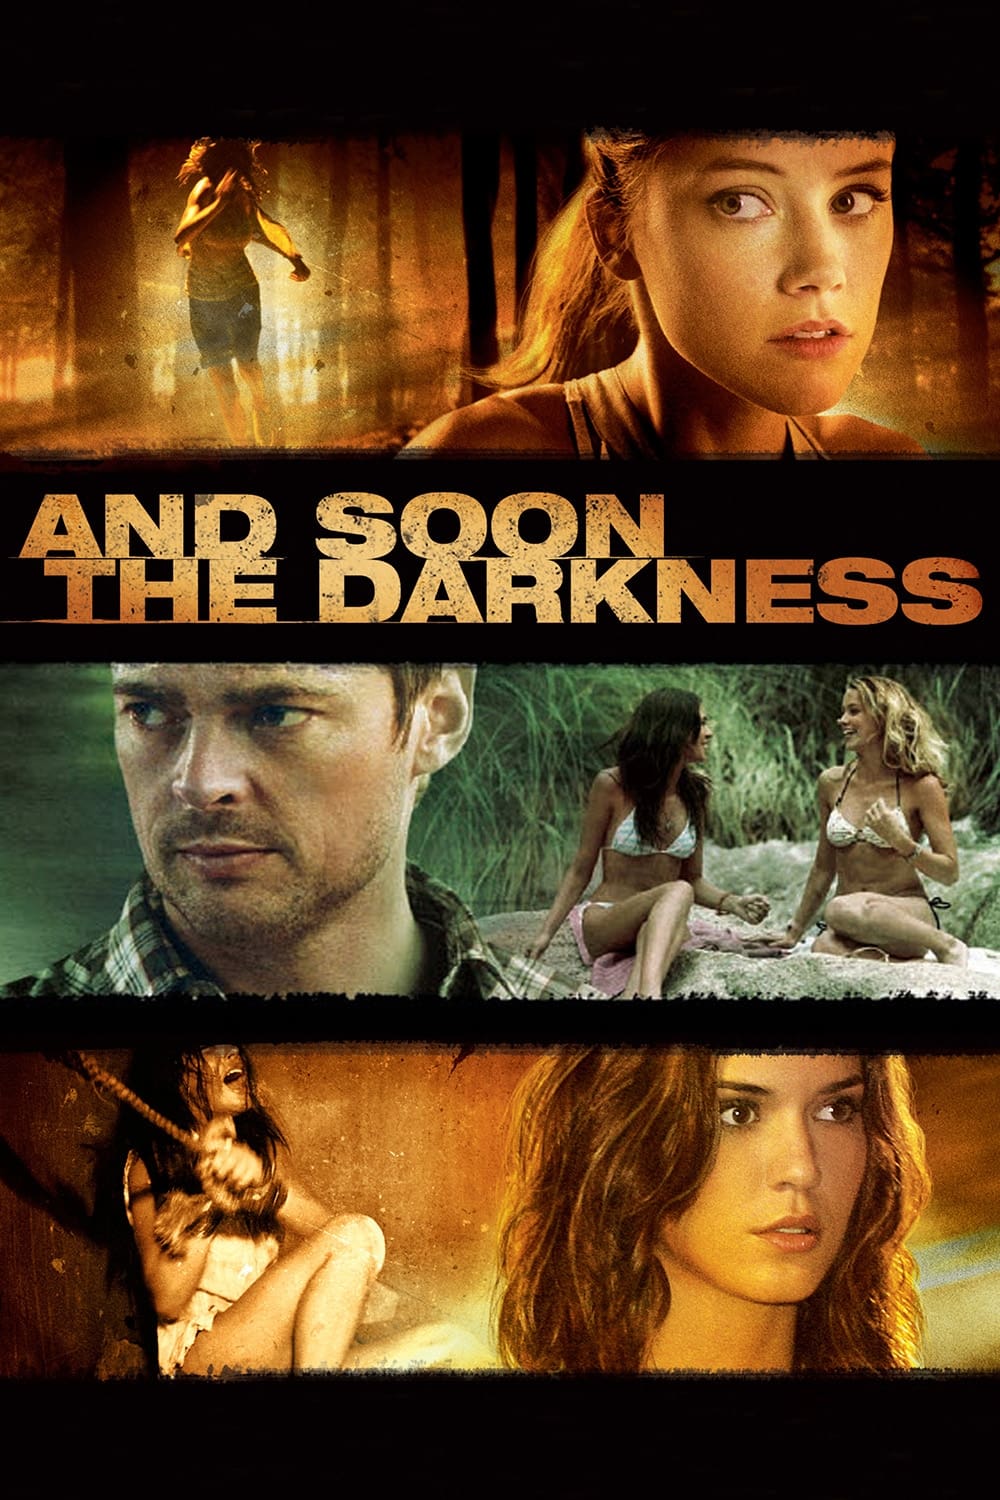 And Soon the Darkness [HD] (2010)